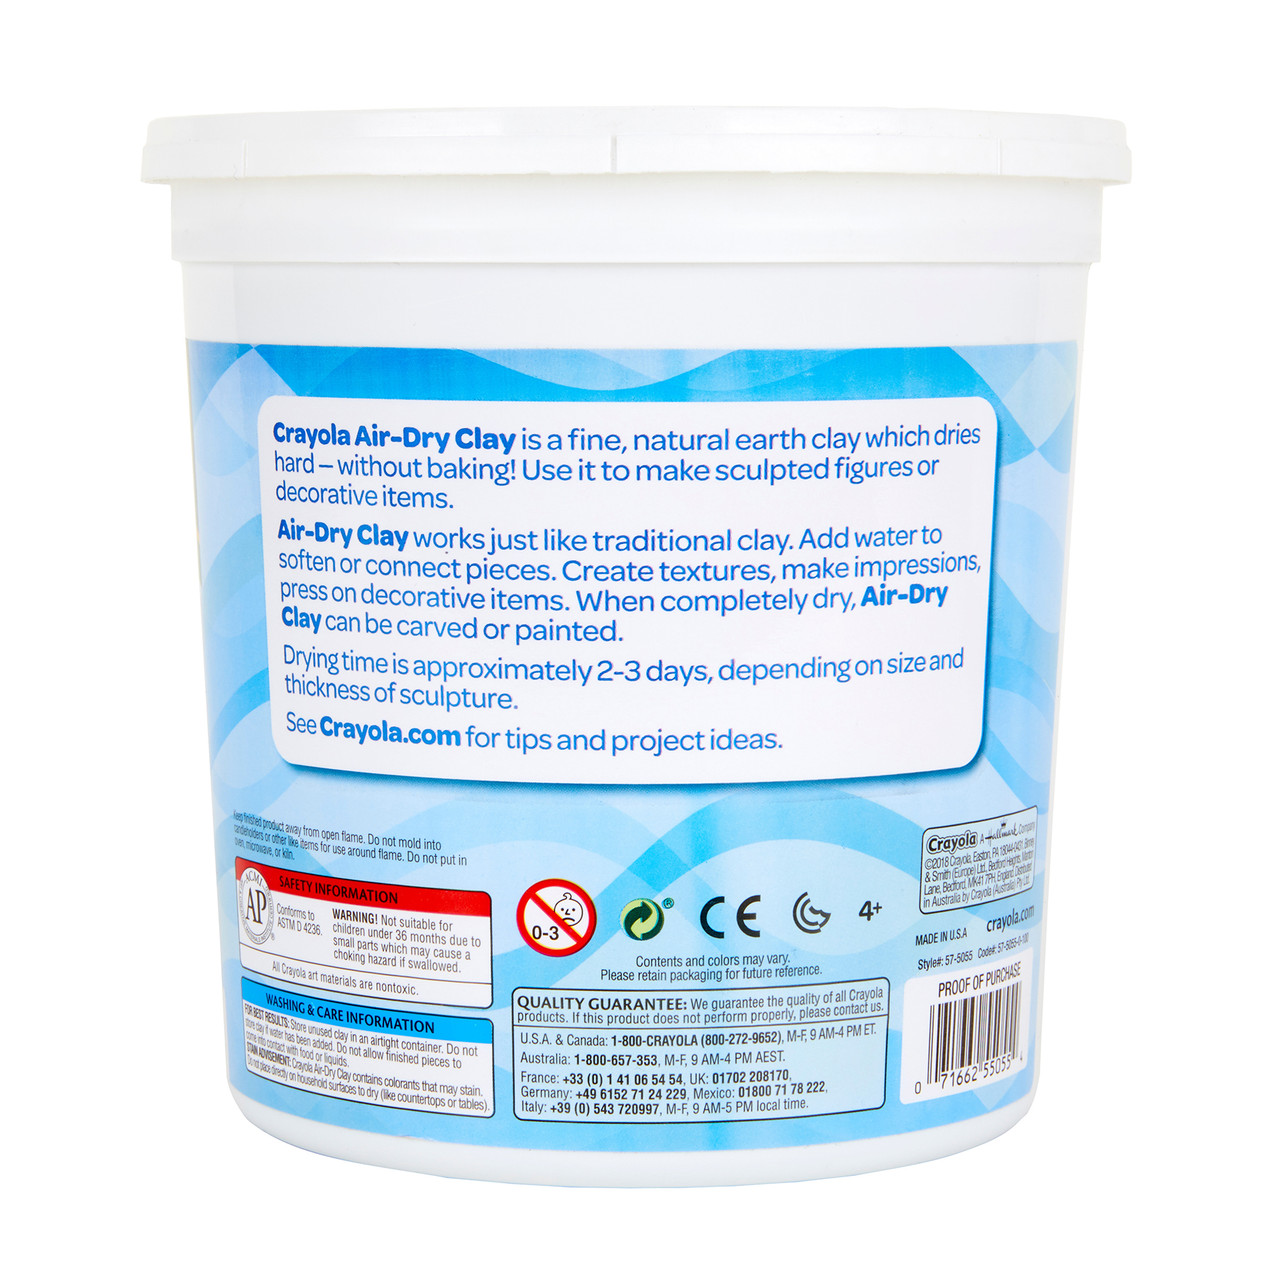 Air-Dry Clay, White, 5 lb Tub, Pack of 2 BIN575055-2  28.48 New